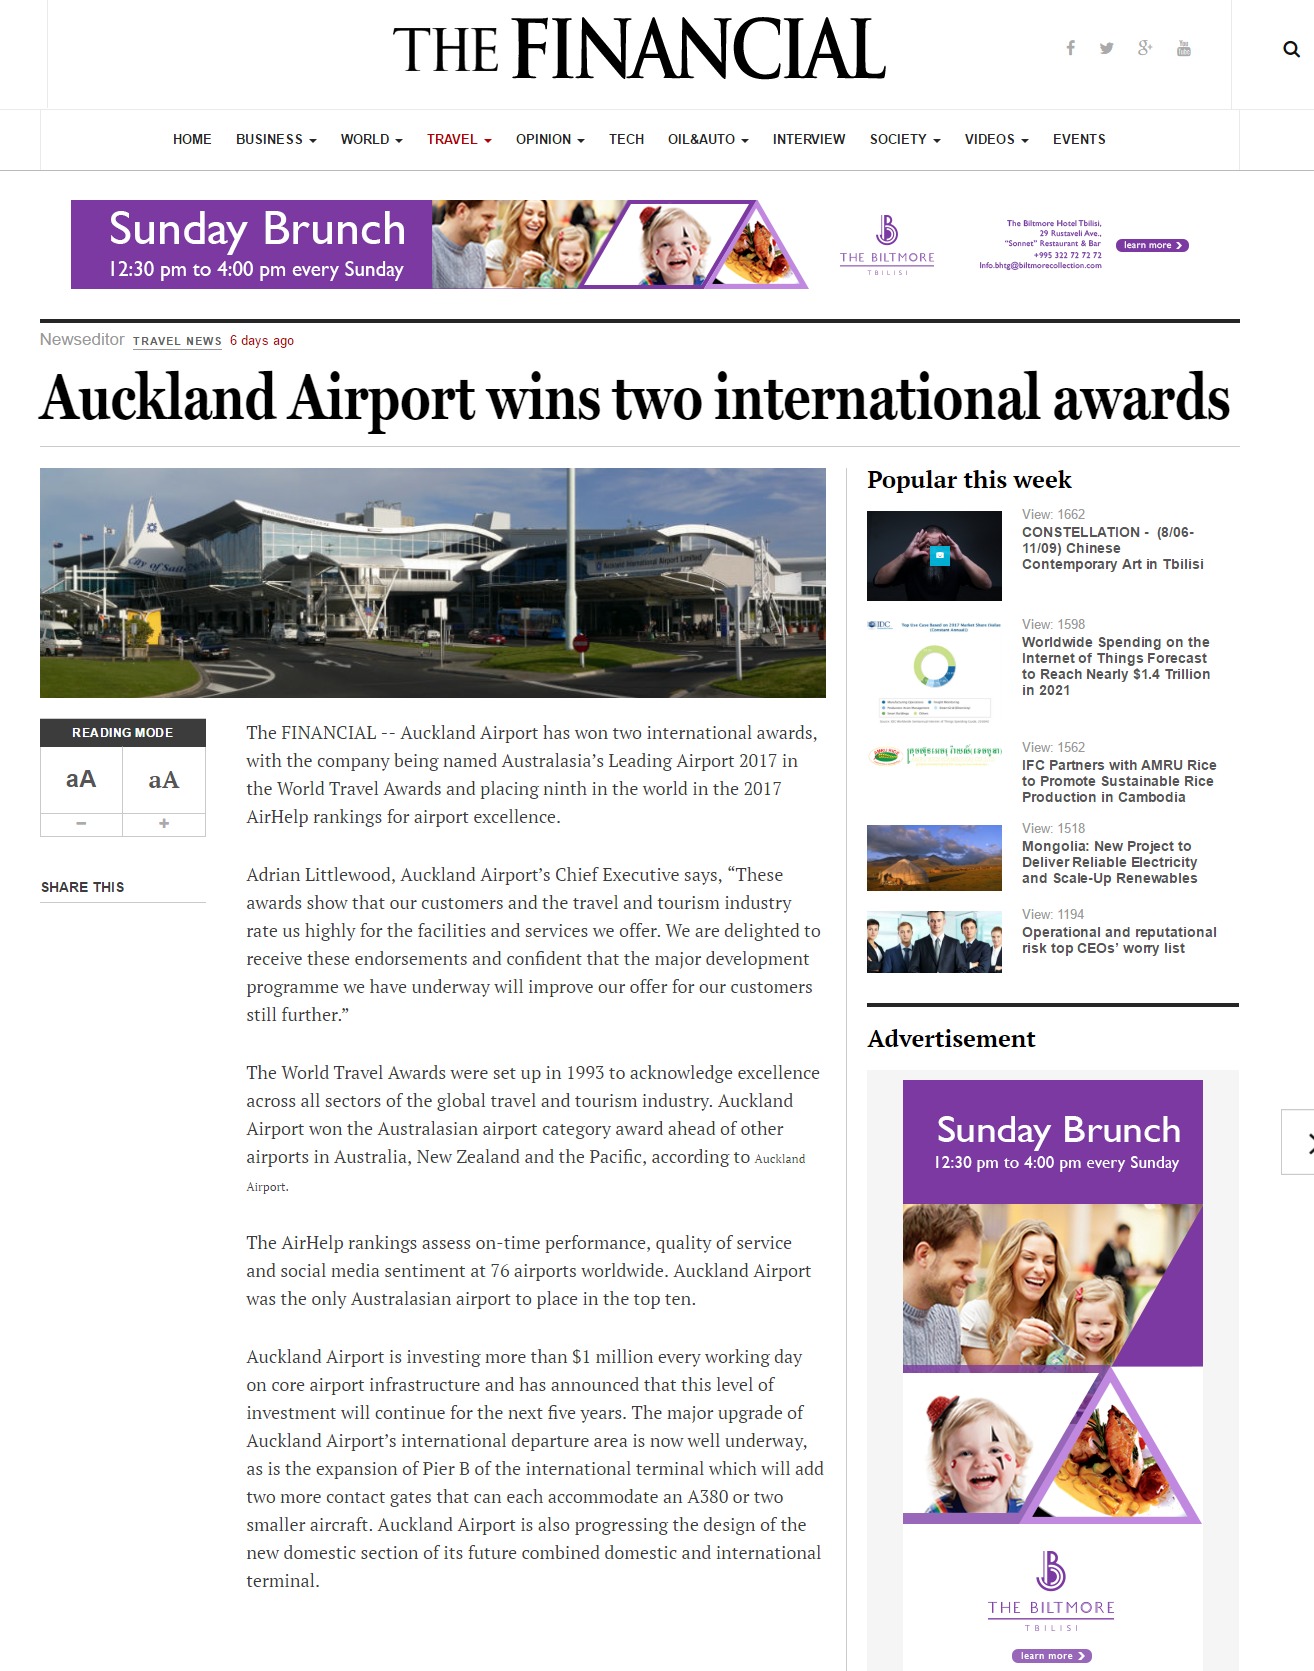 Auckland Airport wins two international awards